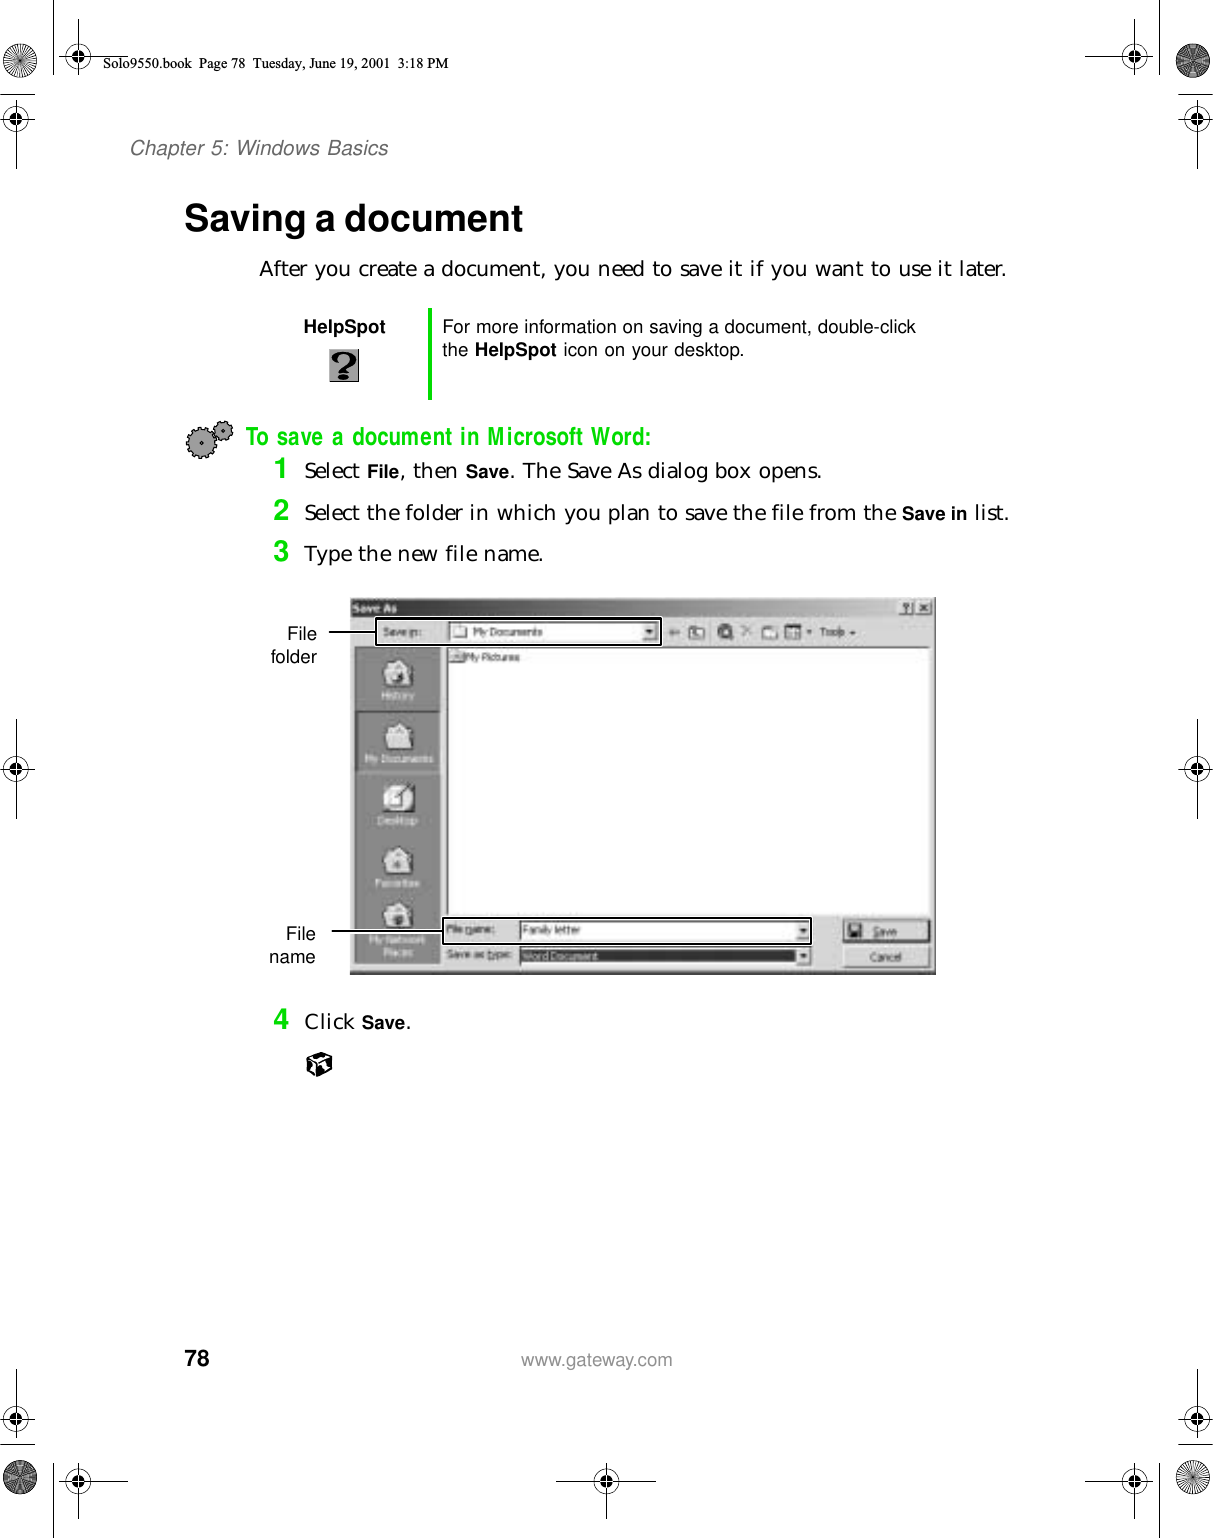 78Chapter 5: Windows Basicswww.gateway.comSaving a documentAfter you create a document, you need to save it if you want to use it later.To save a document in Microsoft Word:1Select File, then Save. The Save As dialog box opens.2Select the folder in which you plan to save the file from the Save in list.3Type the new file name.4Click Save.HelpSpot For more information on saving a document, double-click the HelpSpot icon on your desktop.FilefolderFilenameSolo9550.book Page 78 Tuesday, June 19, 2001 3:18 PM